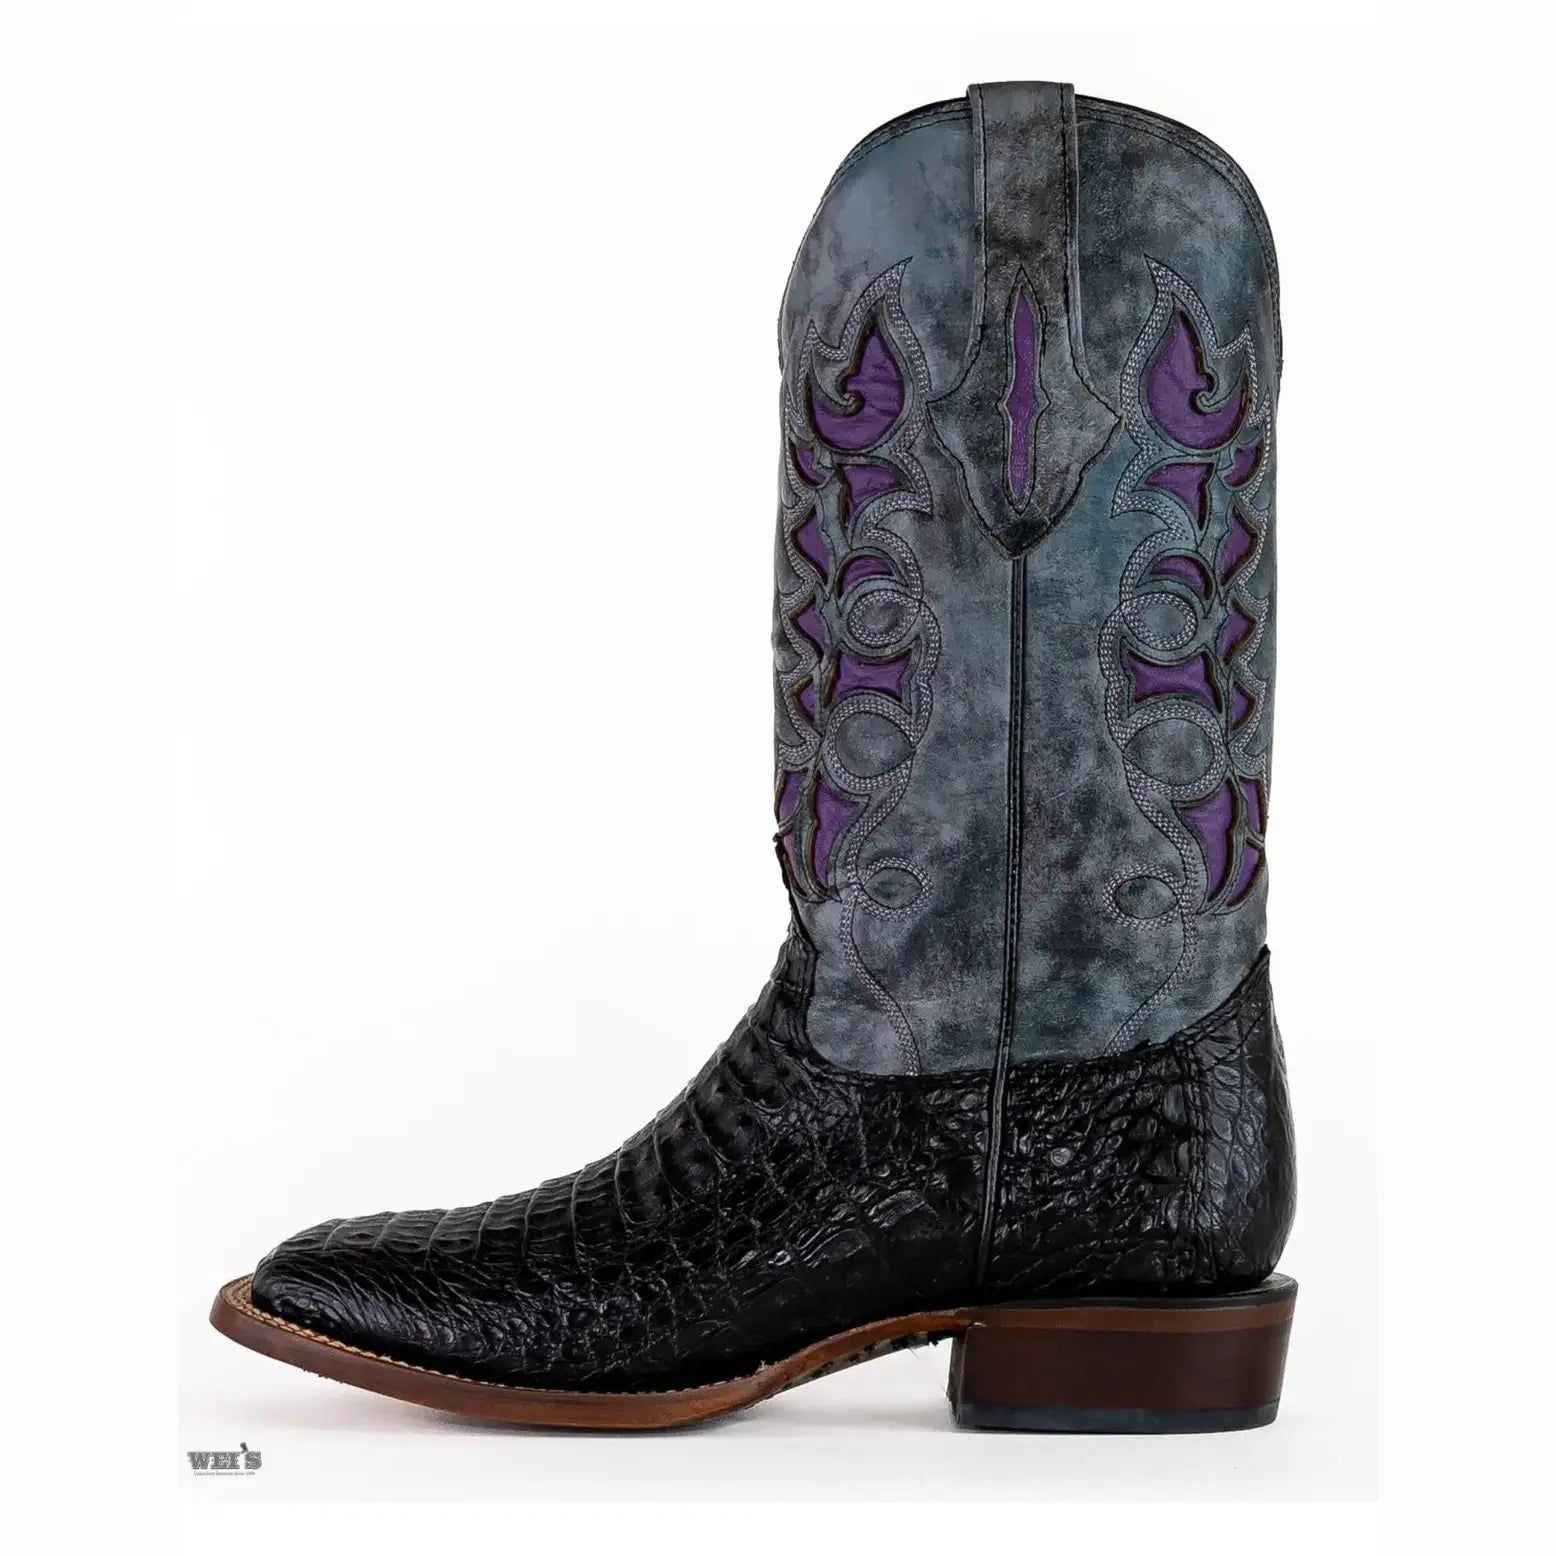 Lucchese Women's Cowgirl Boots 13" Exotic Caiman Wide Square Toe M3812 - Lucchese Boots